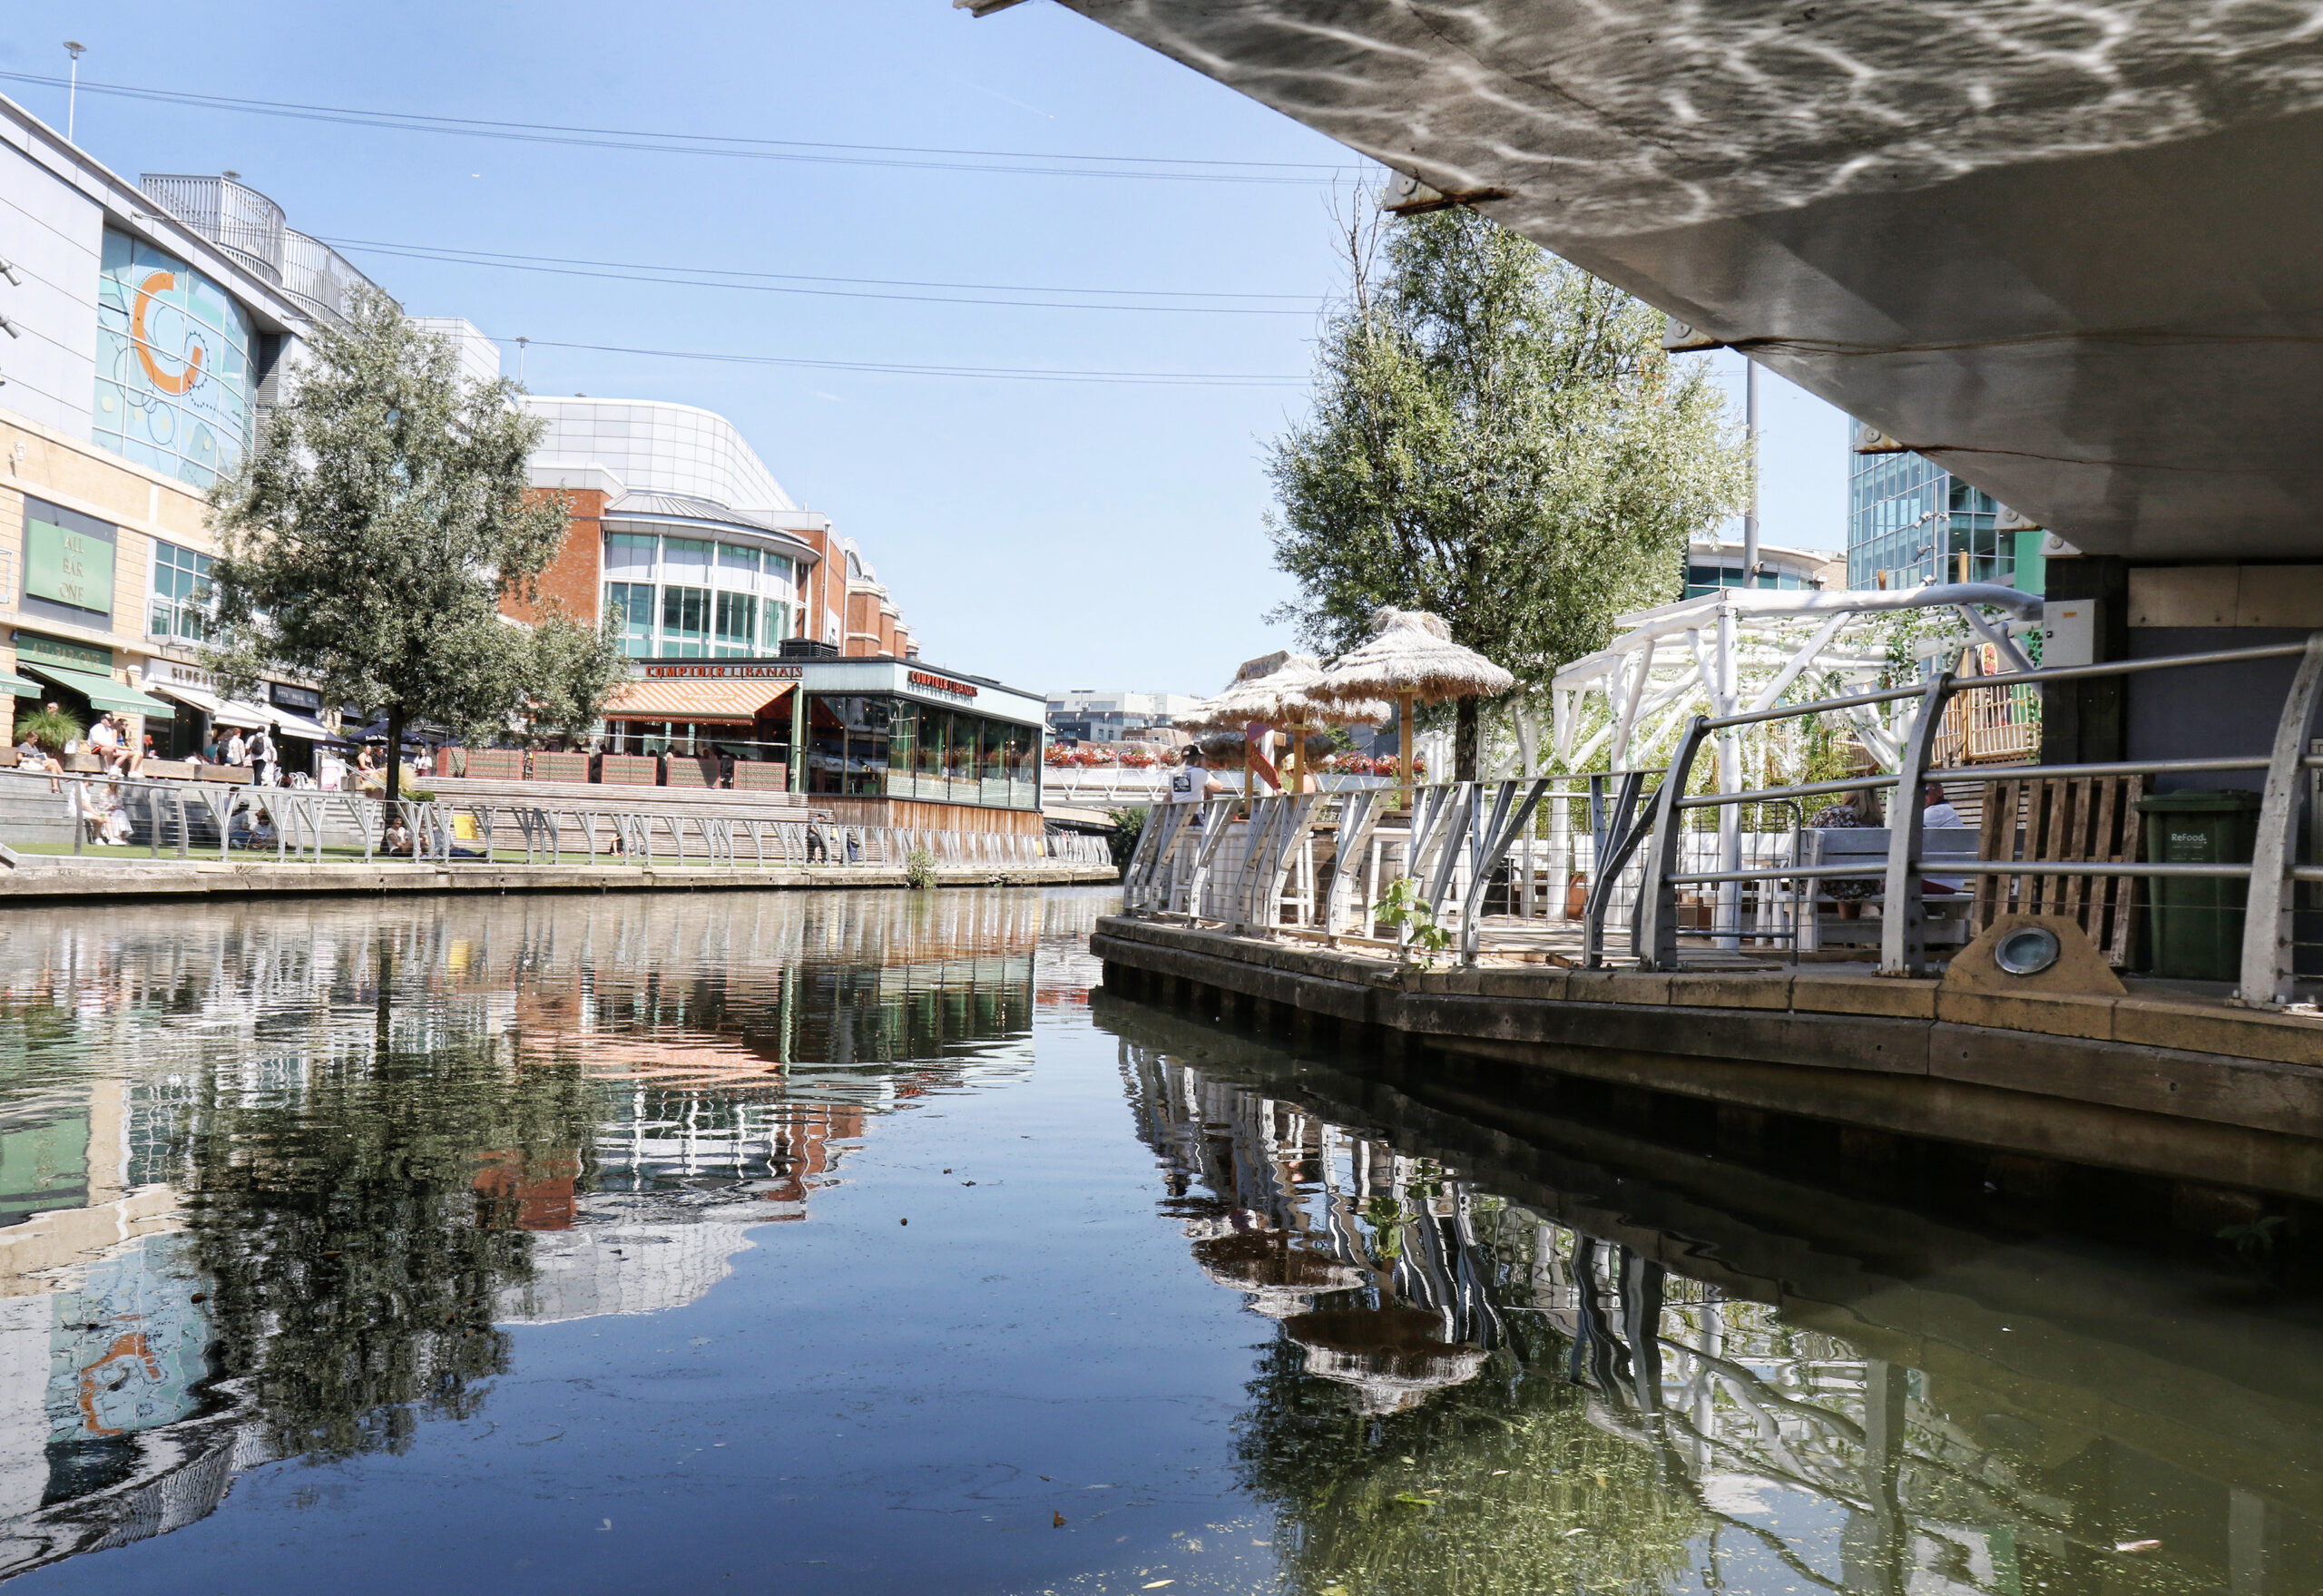 Pop-up bar at Reading's Oracle Riverside applies for extended hours